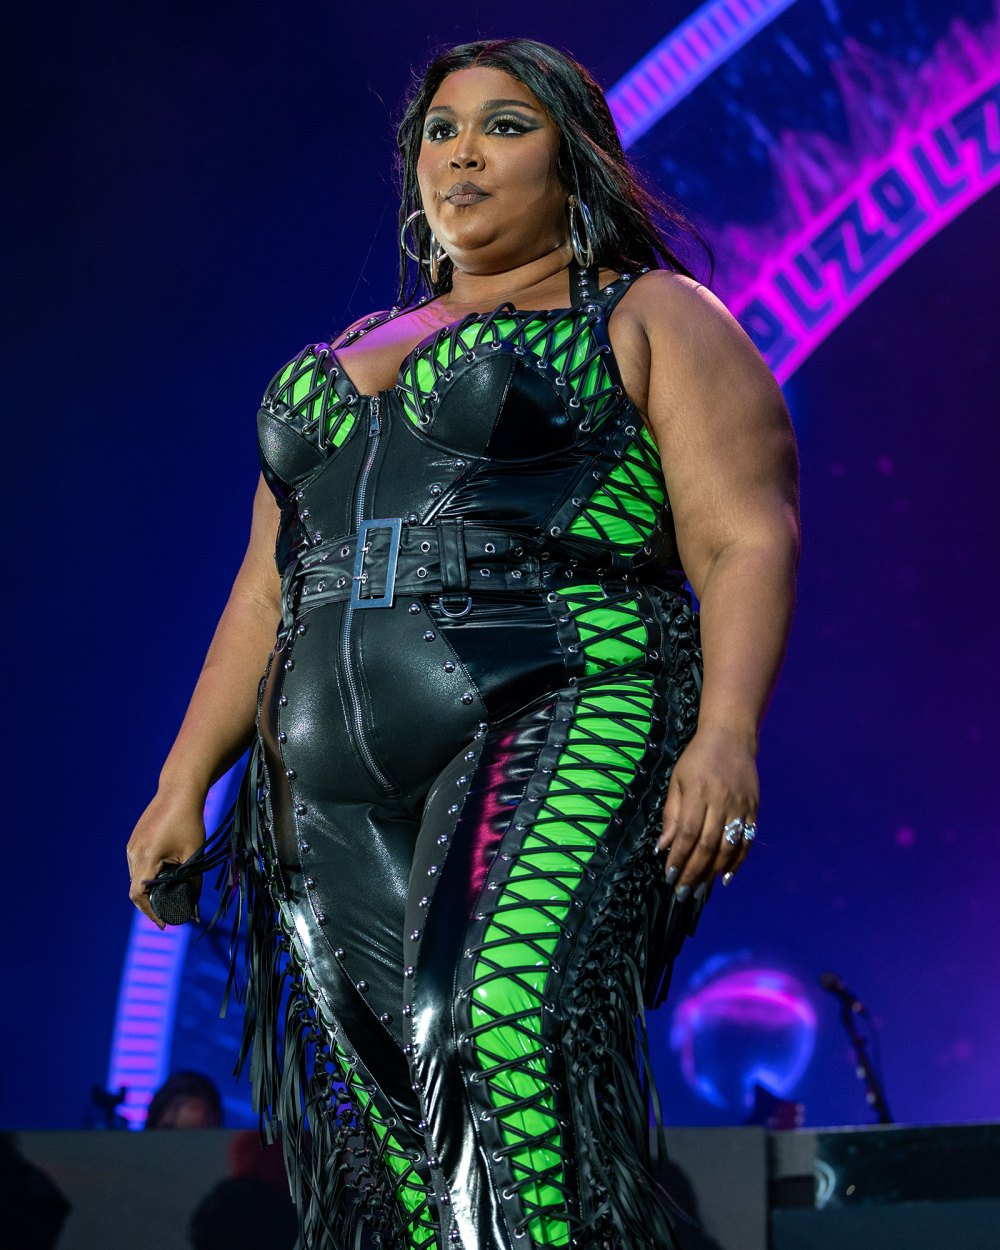 Lizzo's Response to Lawsuit Was an Example of More 'Gaslighting' and 'Retaliation,' Dancers Claim